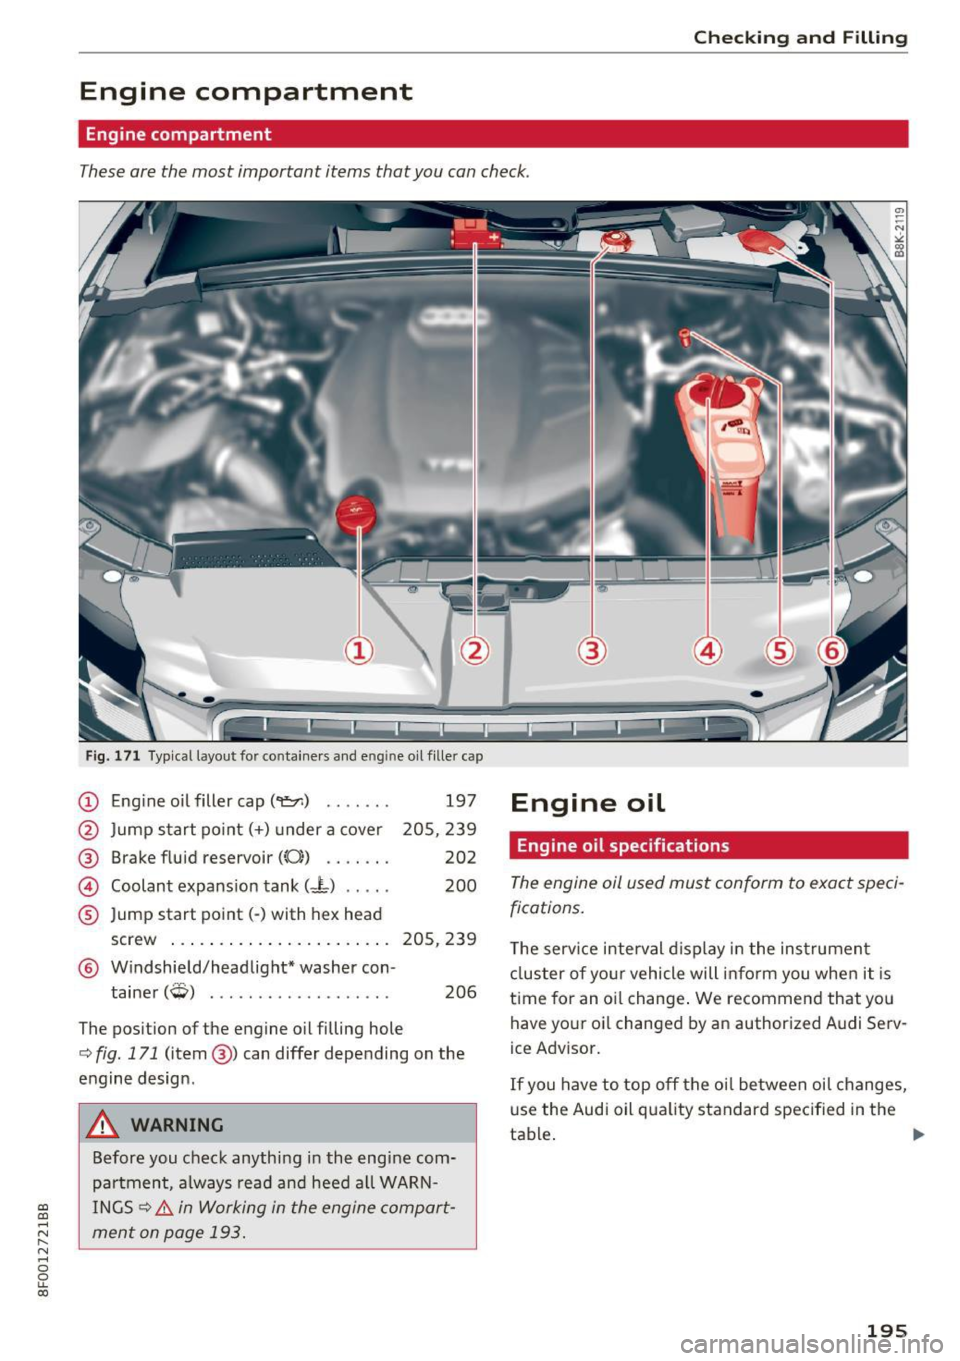 AUDI A5 CABRIOLET 2017  Owners Manual a:, 
a:, 
...... N 
l­
N 
...... 0 
0 
LL co 
Checking  and Filling 
Engine  compartment 
Engine  compartment 
These are the  most  important  items  that you  can check. 
Fig. 171  Typical layout f